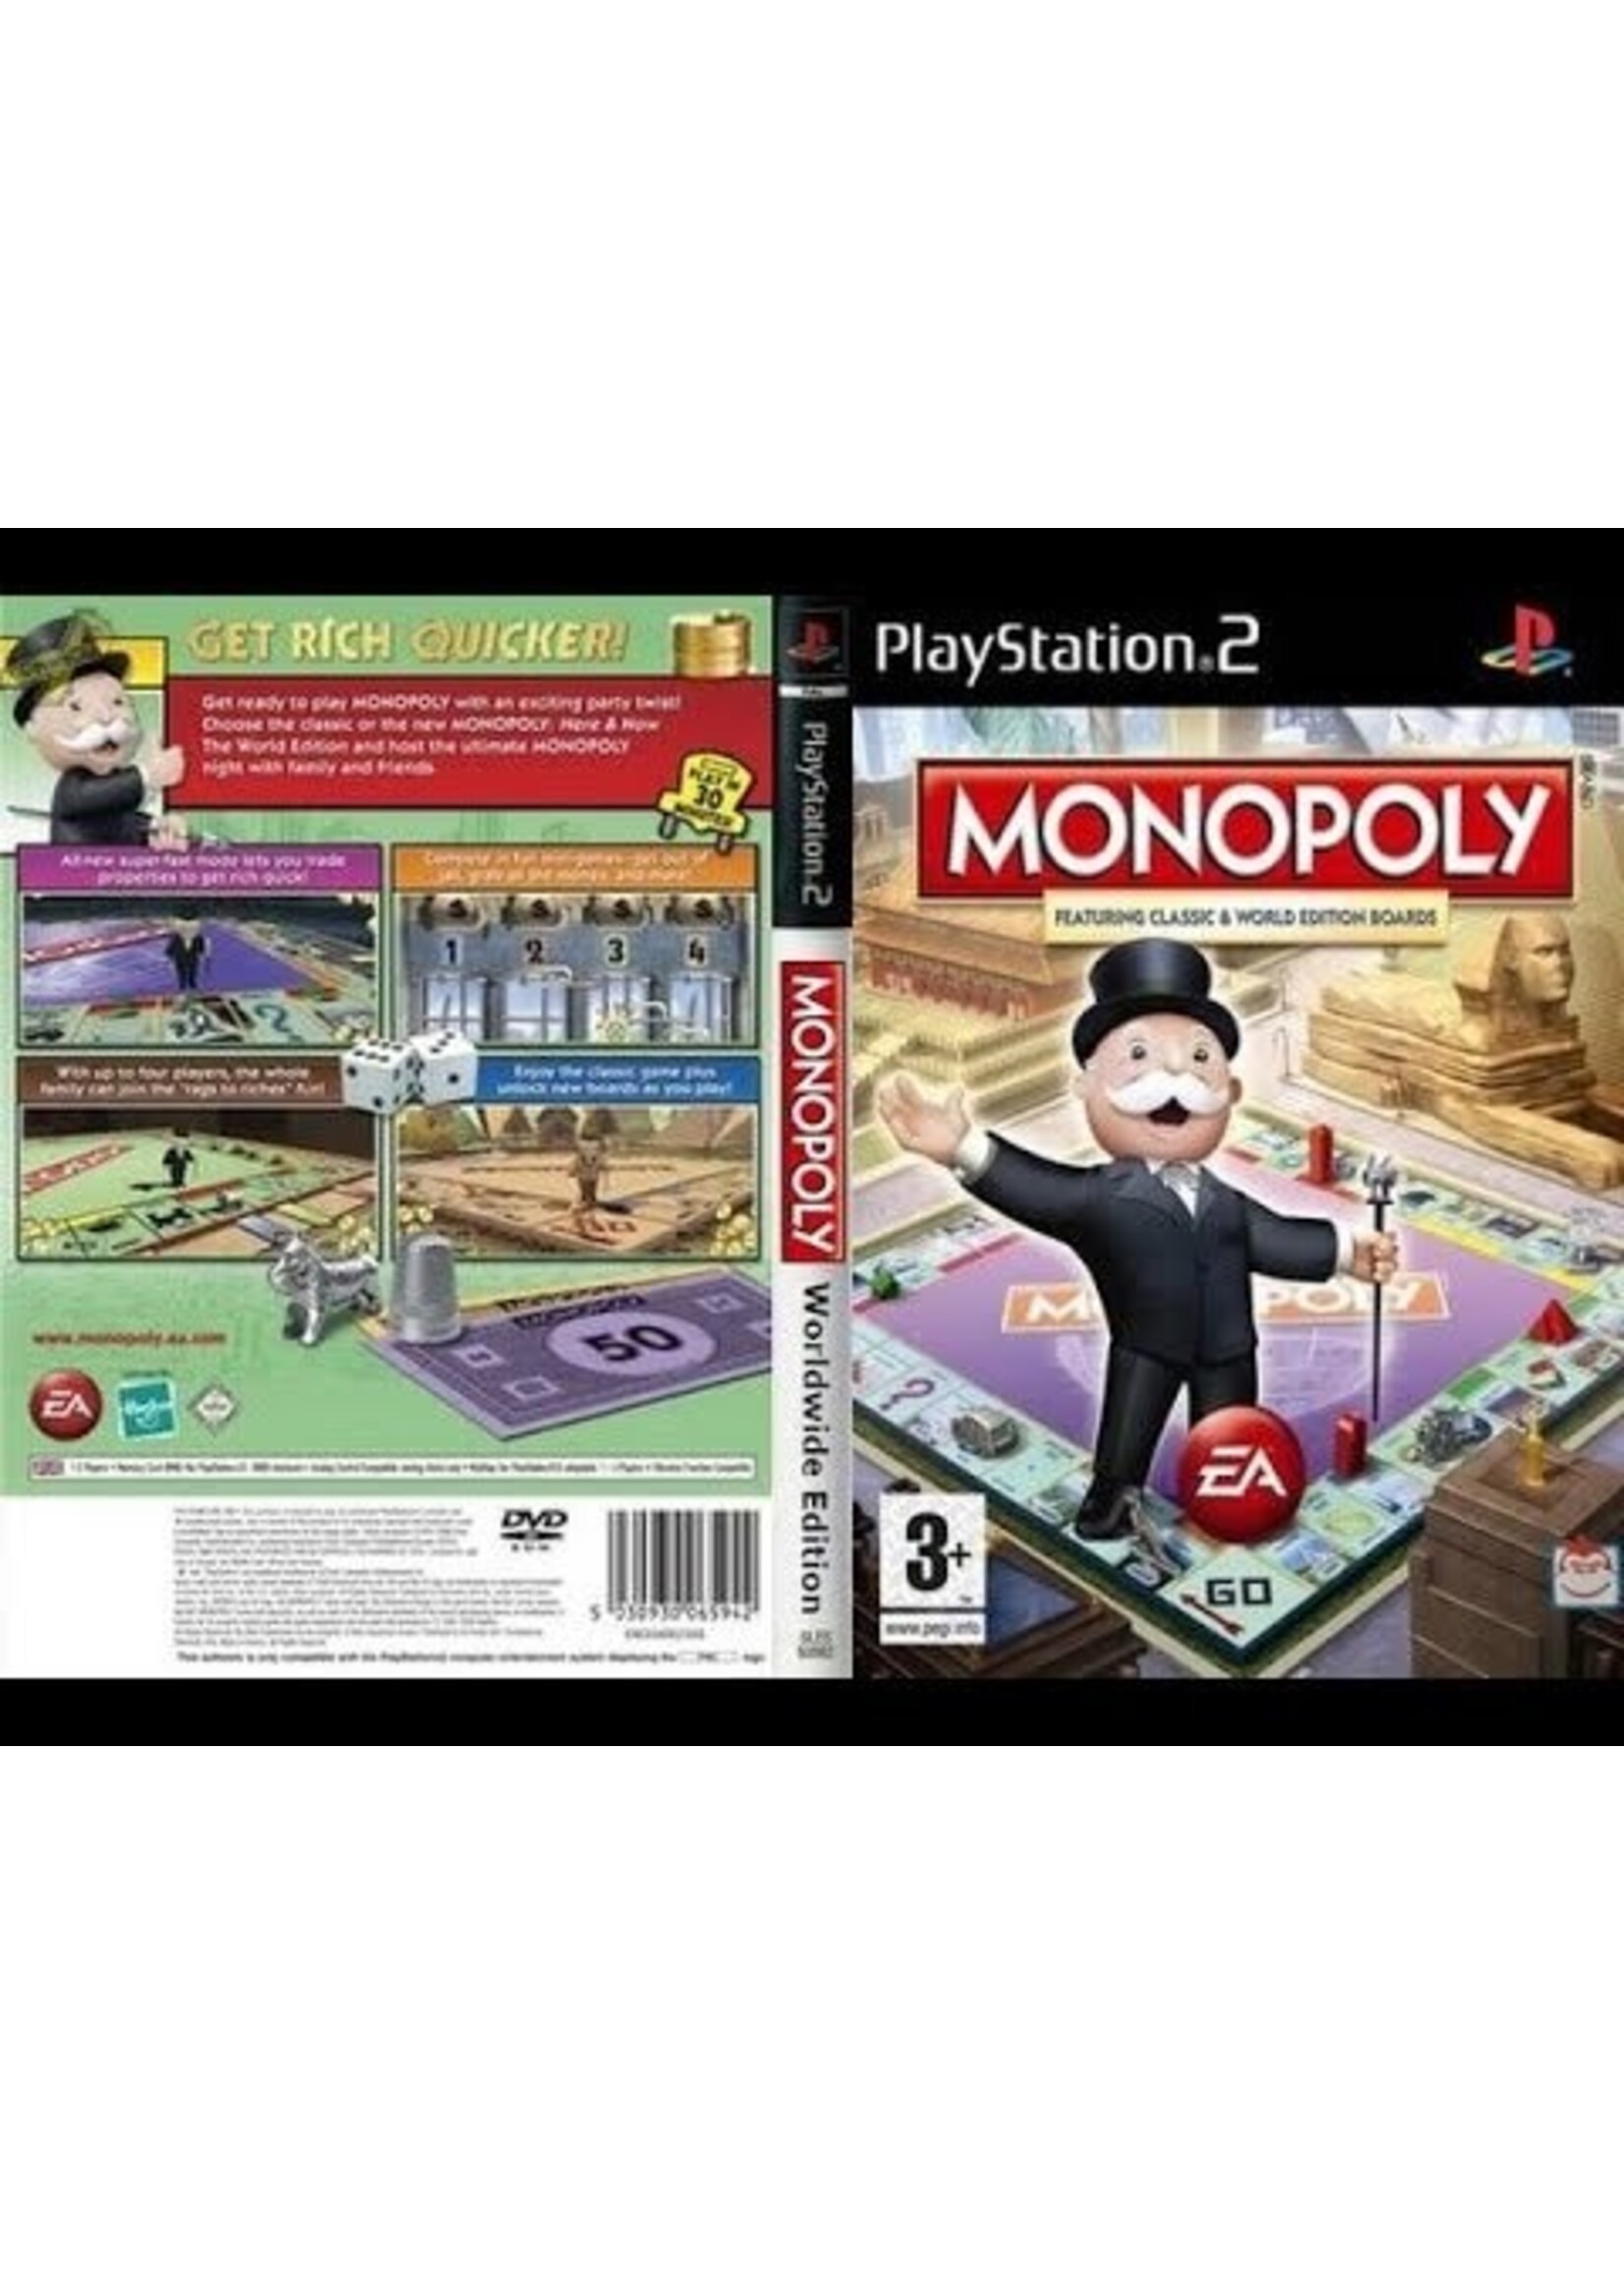 Sony Playstation 2 (PS2) Monopoly